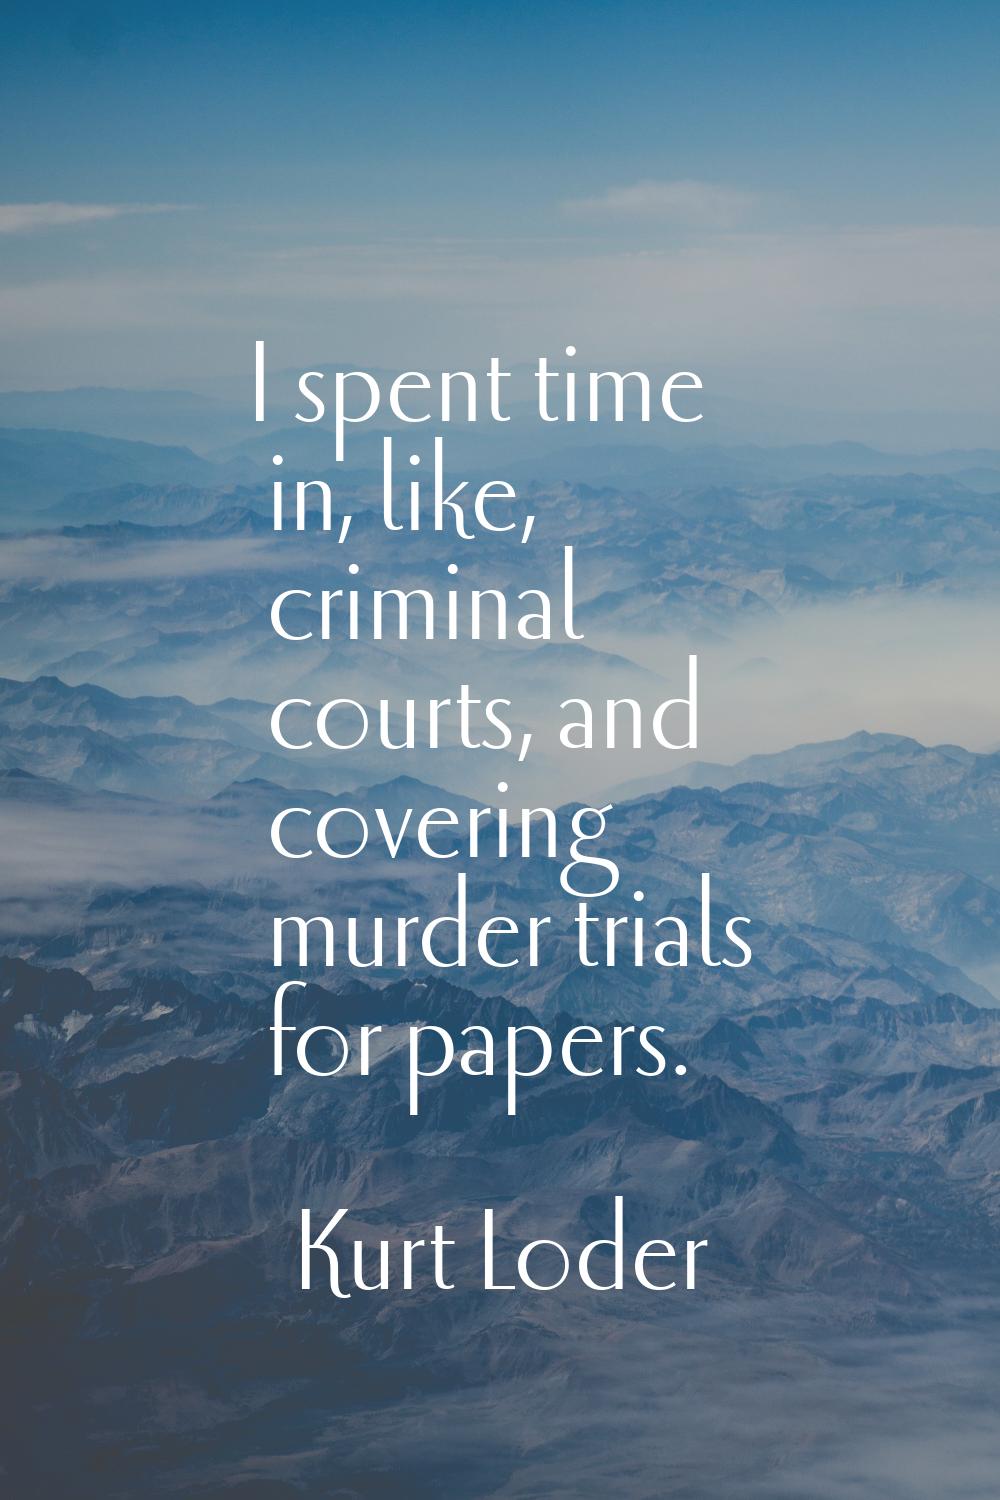 I spent time in, like, criminal courts, and covering murder trials for papers.